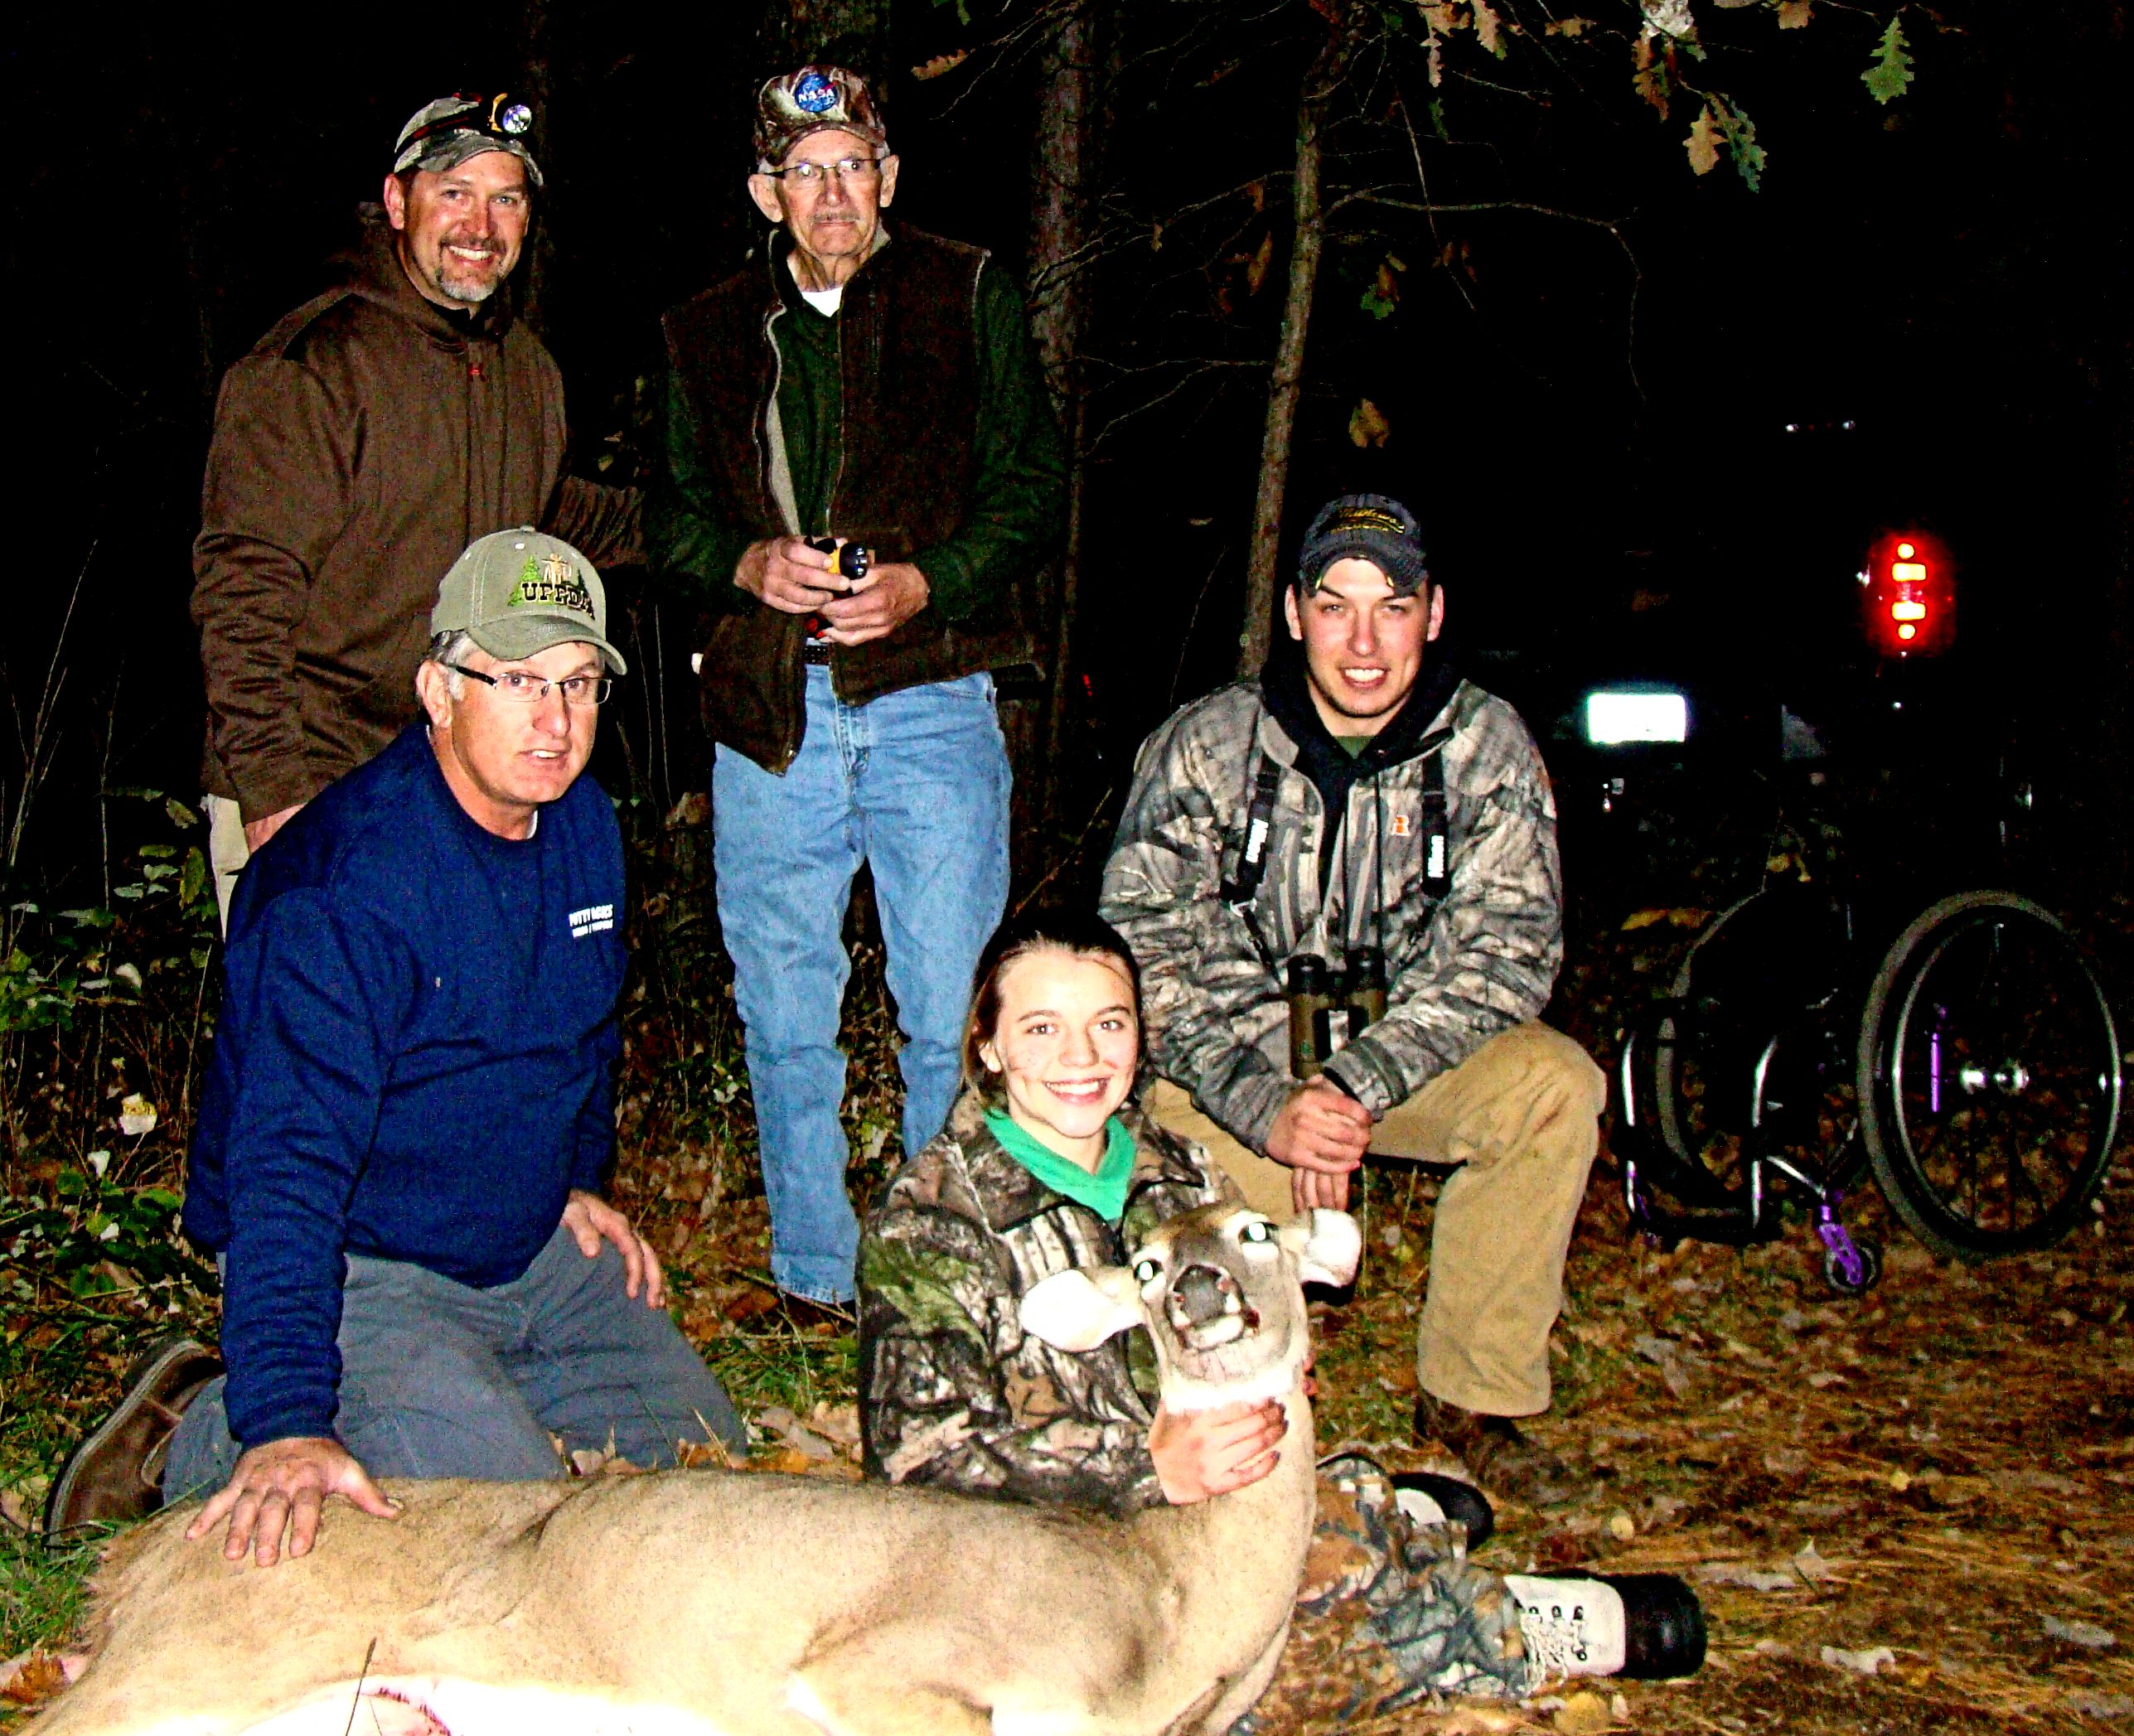 Brynn Duncan surrounded by (l to r) Richard Swenson on ground, Kelly, Dean and Kody Craft (3-generations of excellence).